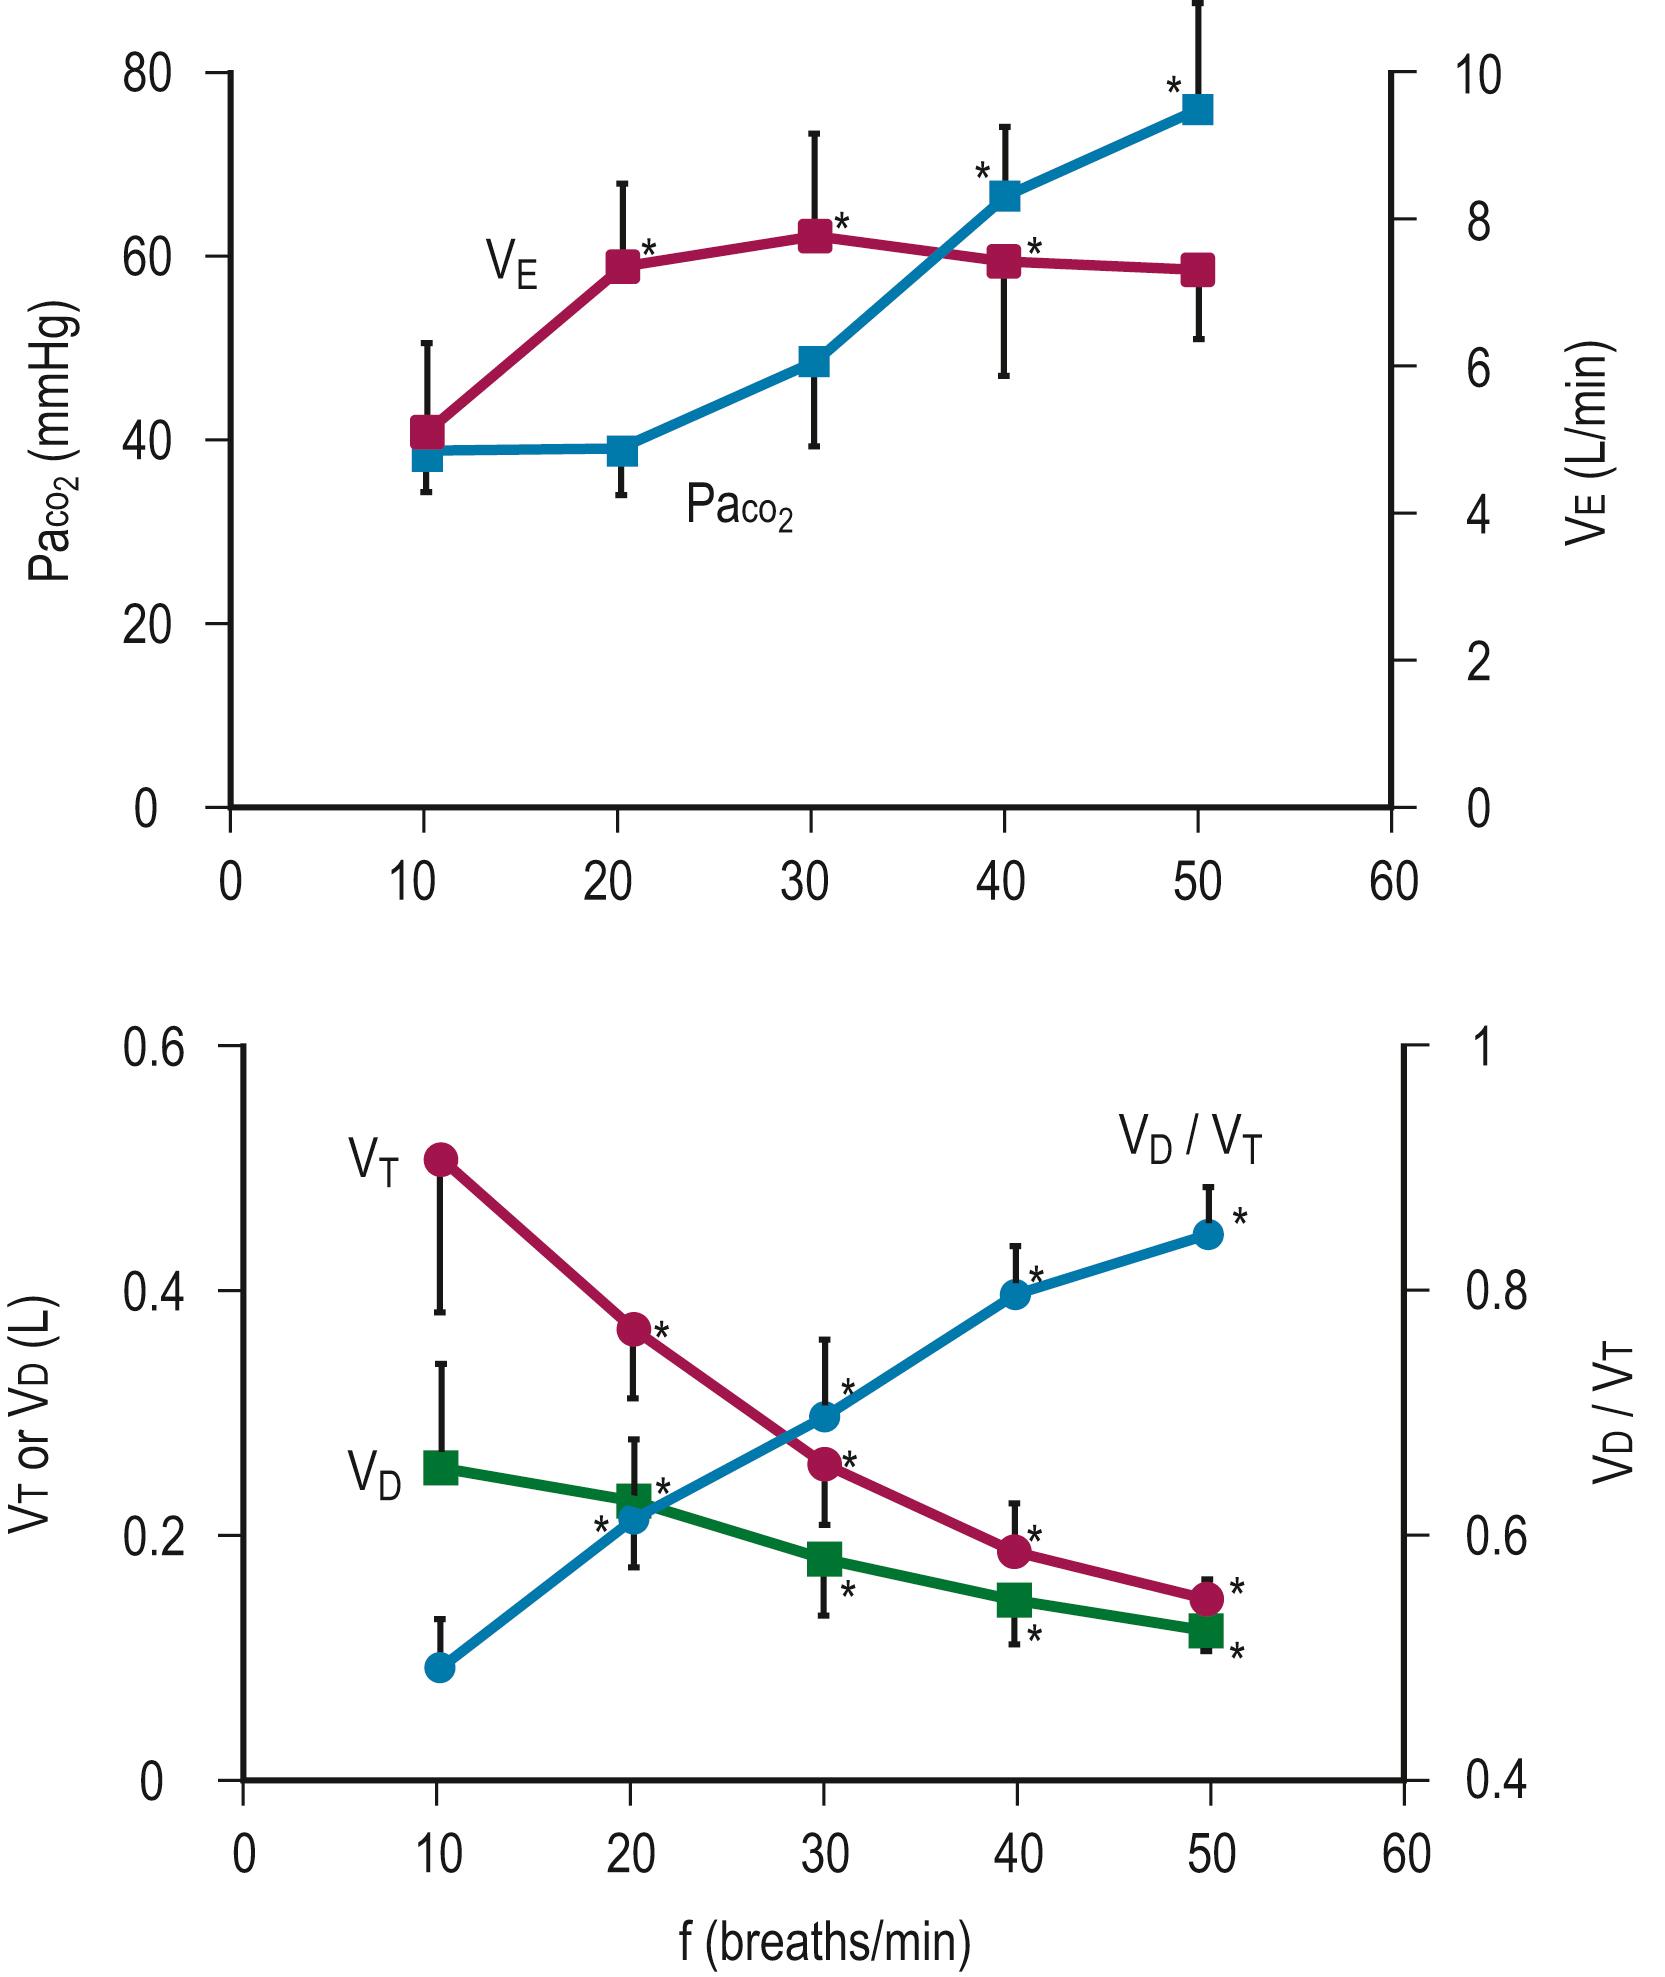 Fig. 7.8, Effect of rate on tidal volume ( V d / V t) and minute ventilation ( V E ) during pressure-limited ventilation. Note that V E remains unchanged above 20 breaths/min. Simultaneously, V d / V t and Pa CO 2 increase, despite an increase in respiratory rate.